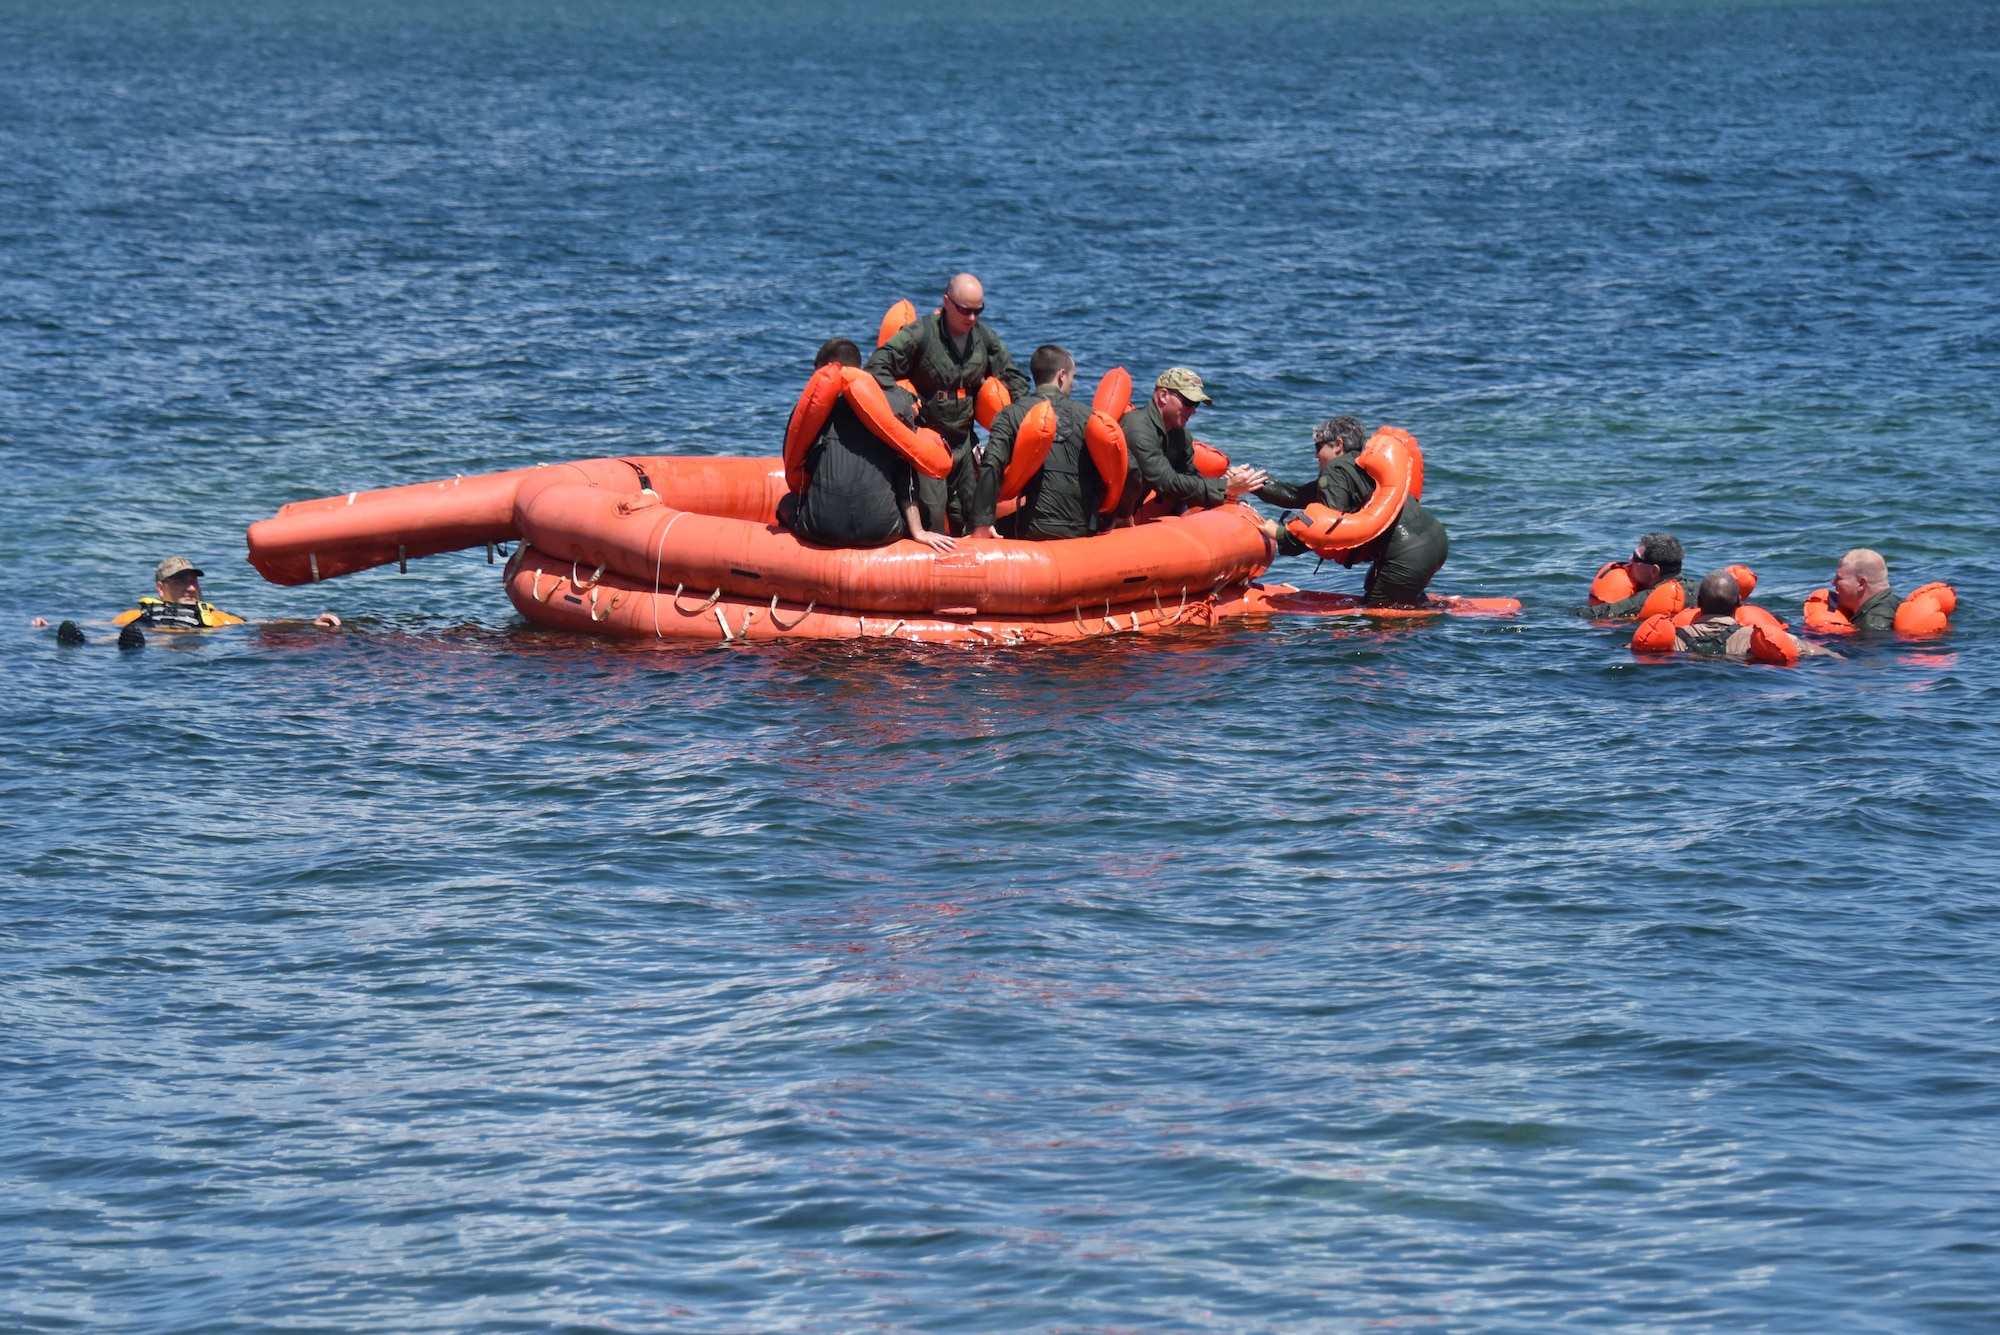 Master Sgt. Jackie Kupetz, load master with the 911th Operations Group, boards a 20-man life raft with the assistance of her fellow Airmen during water survival training at Naval Air Station Key West, Florida, August 18, 2016. Airmen got acquainted with several pieces of survival equipment during the training so that they would know how to react in a life-or-death situation. (U.S. Air Force photo by Staff Sgt. Marjorie A. Bowlden)